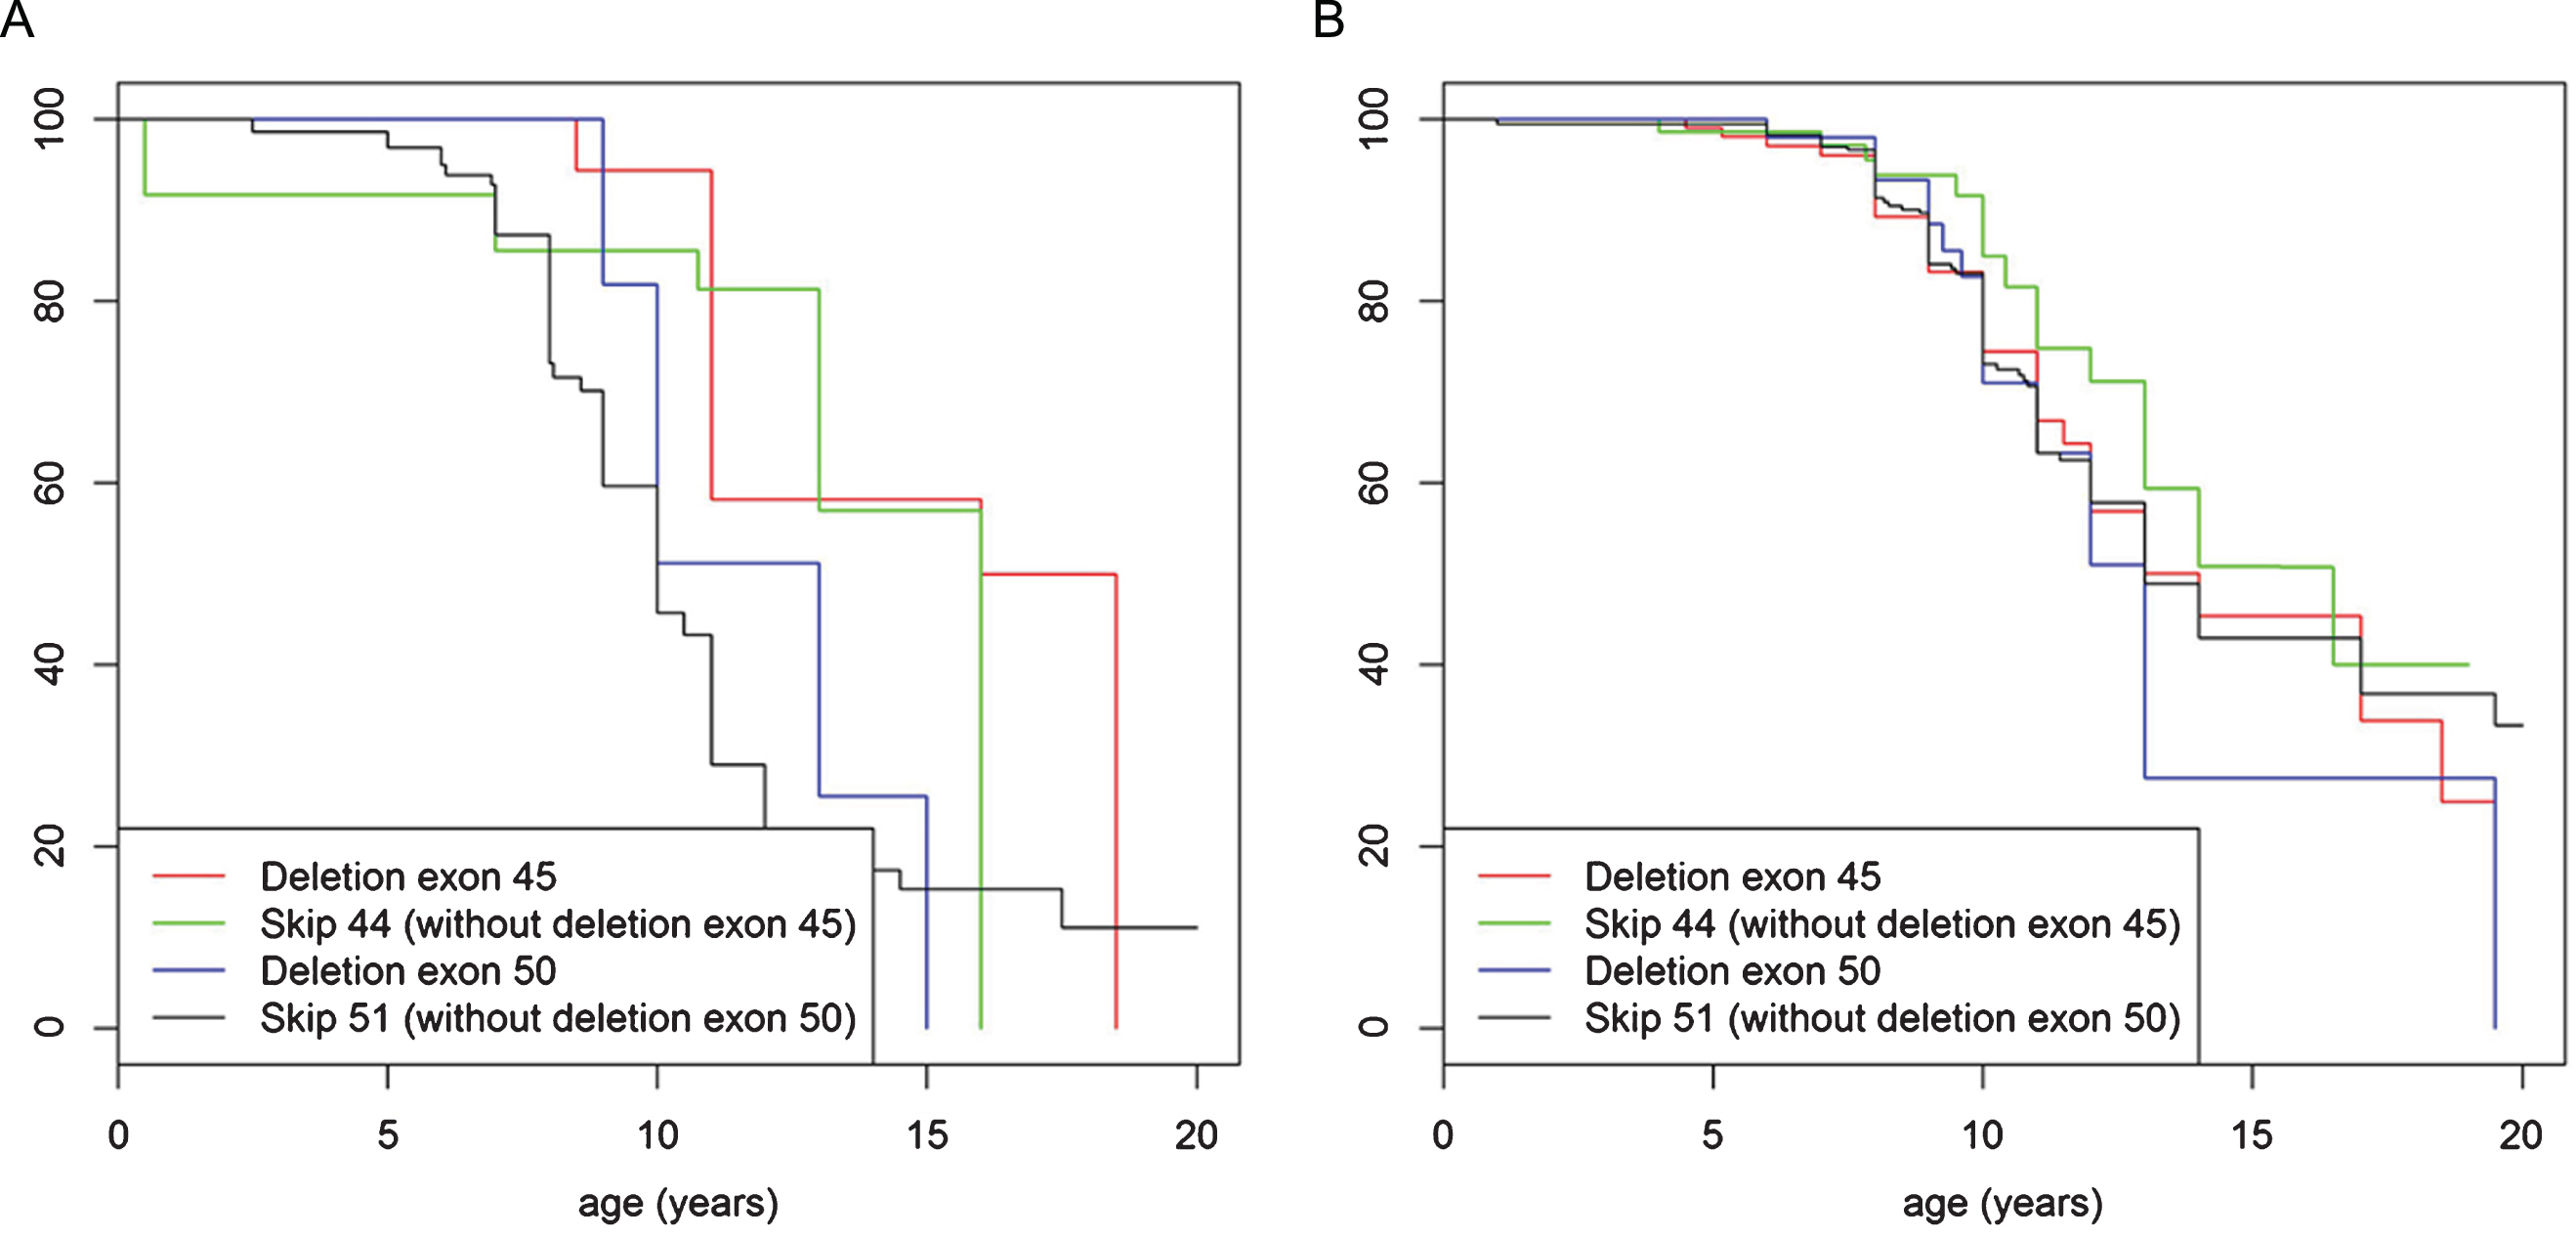 Turnbull analysis of loss of ambulation in patients under the age of 20 years in mutations rescued by exon skip 44 and 51. (A) represents patients never treated with corticosteroids and (B) represents patients ever treated with corticosteroids. In both figures the red line indicates patients with deletion of exon 45 mutation, the green line indicates patients with mutations amenable to exon skipping with exon 44 (but not deletion of exon 45 mutations), the blue line indicates patients with deletion of exon 50 mutation and the black line indicates patients with mutations amenable to exon skipping with exon 51 (but not deletion of exon 50 mutations).